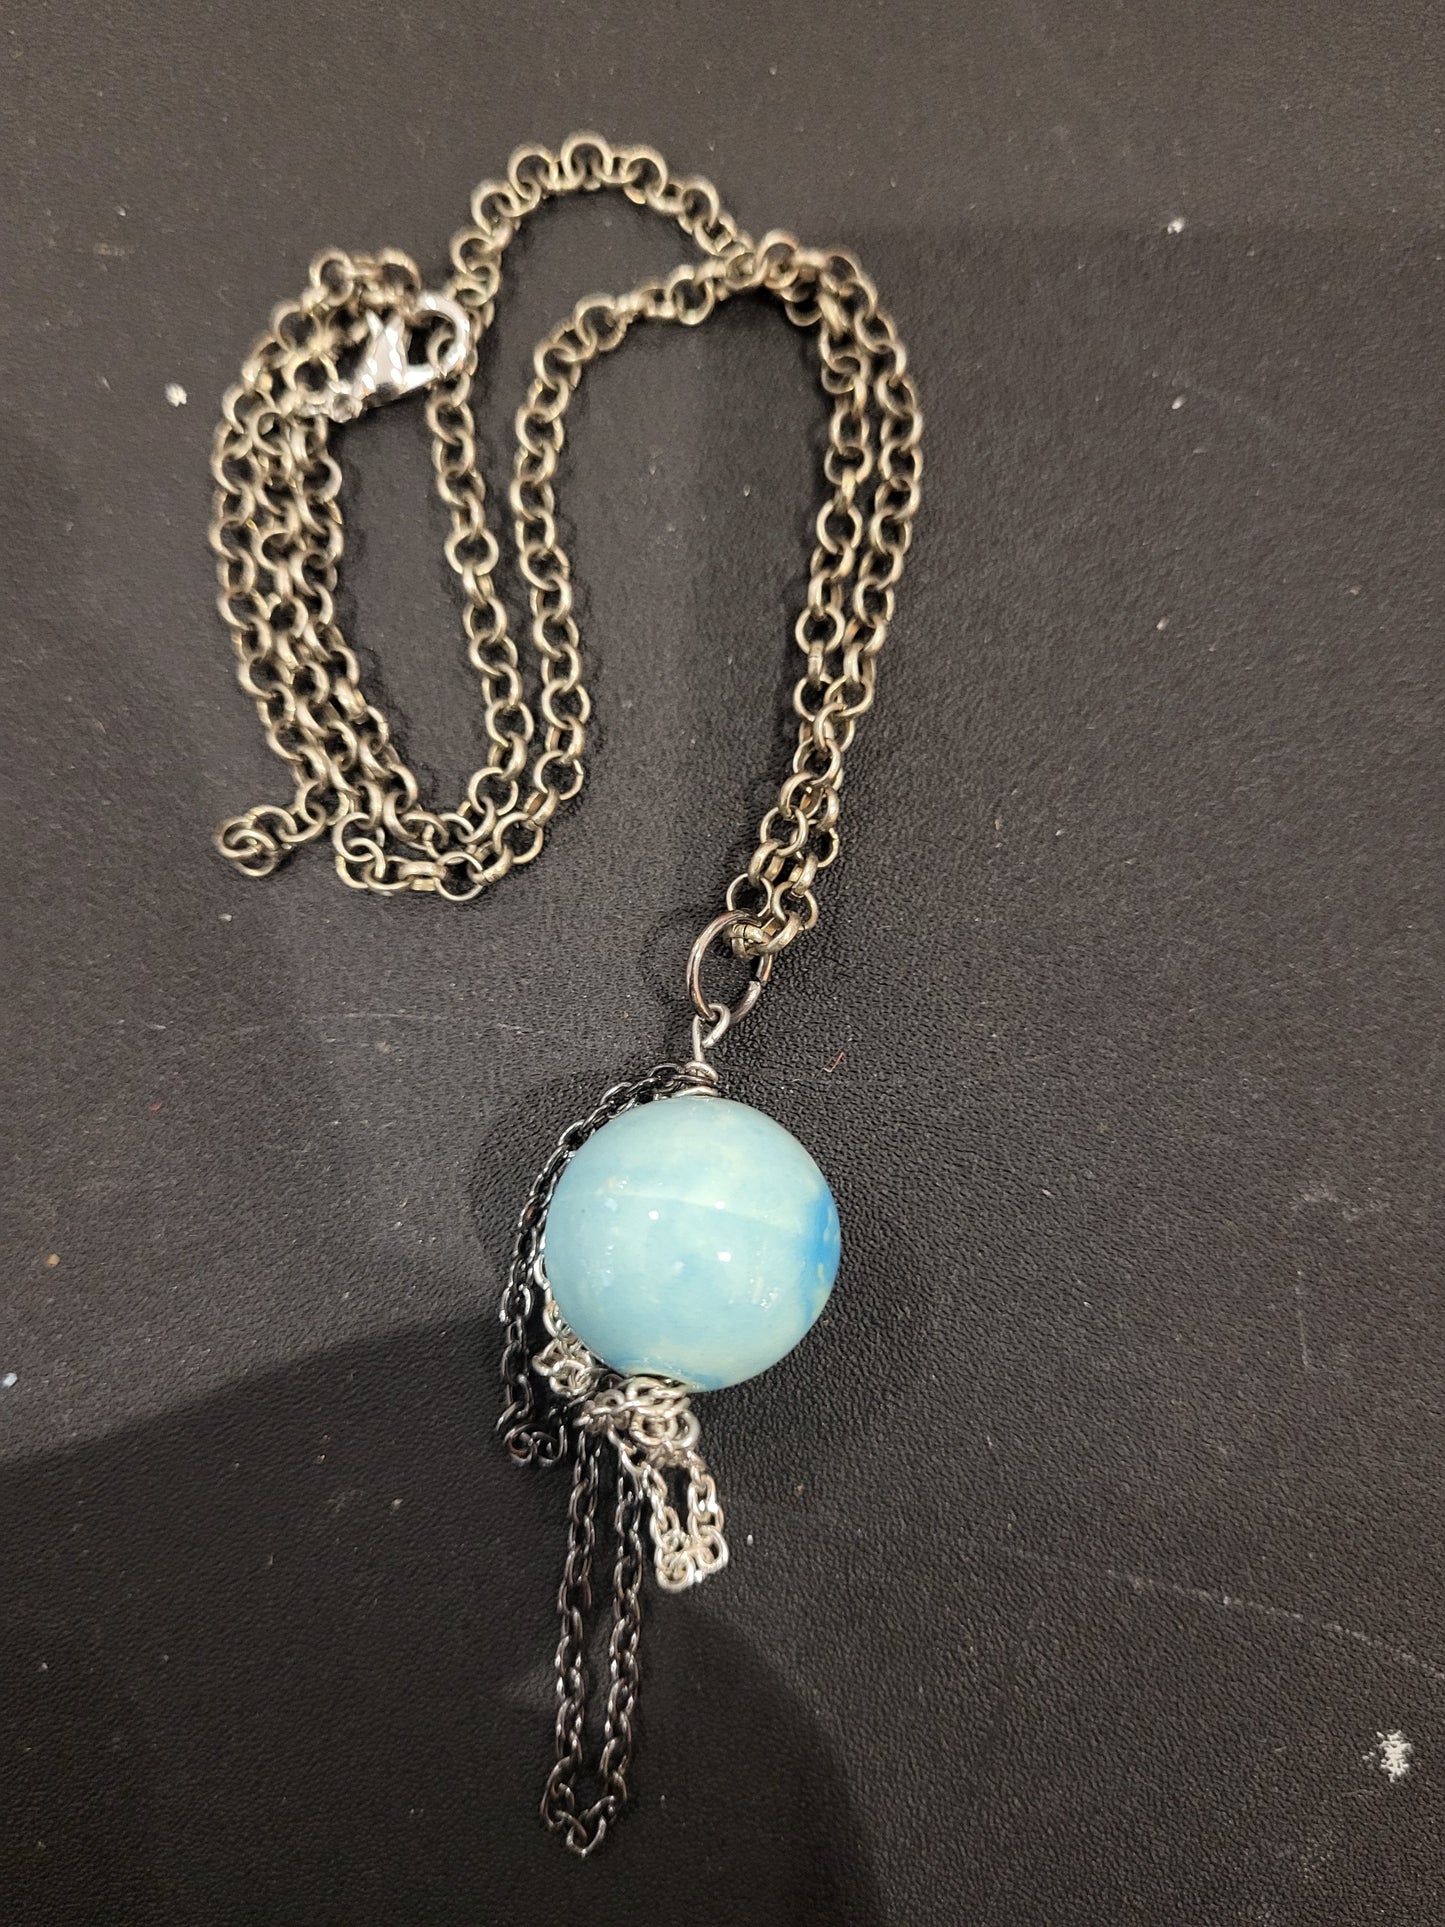 Handmade large blue bead necklace with chain accents